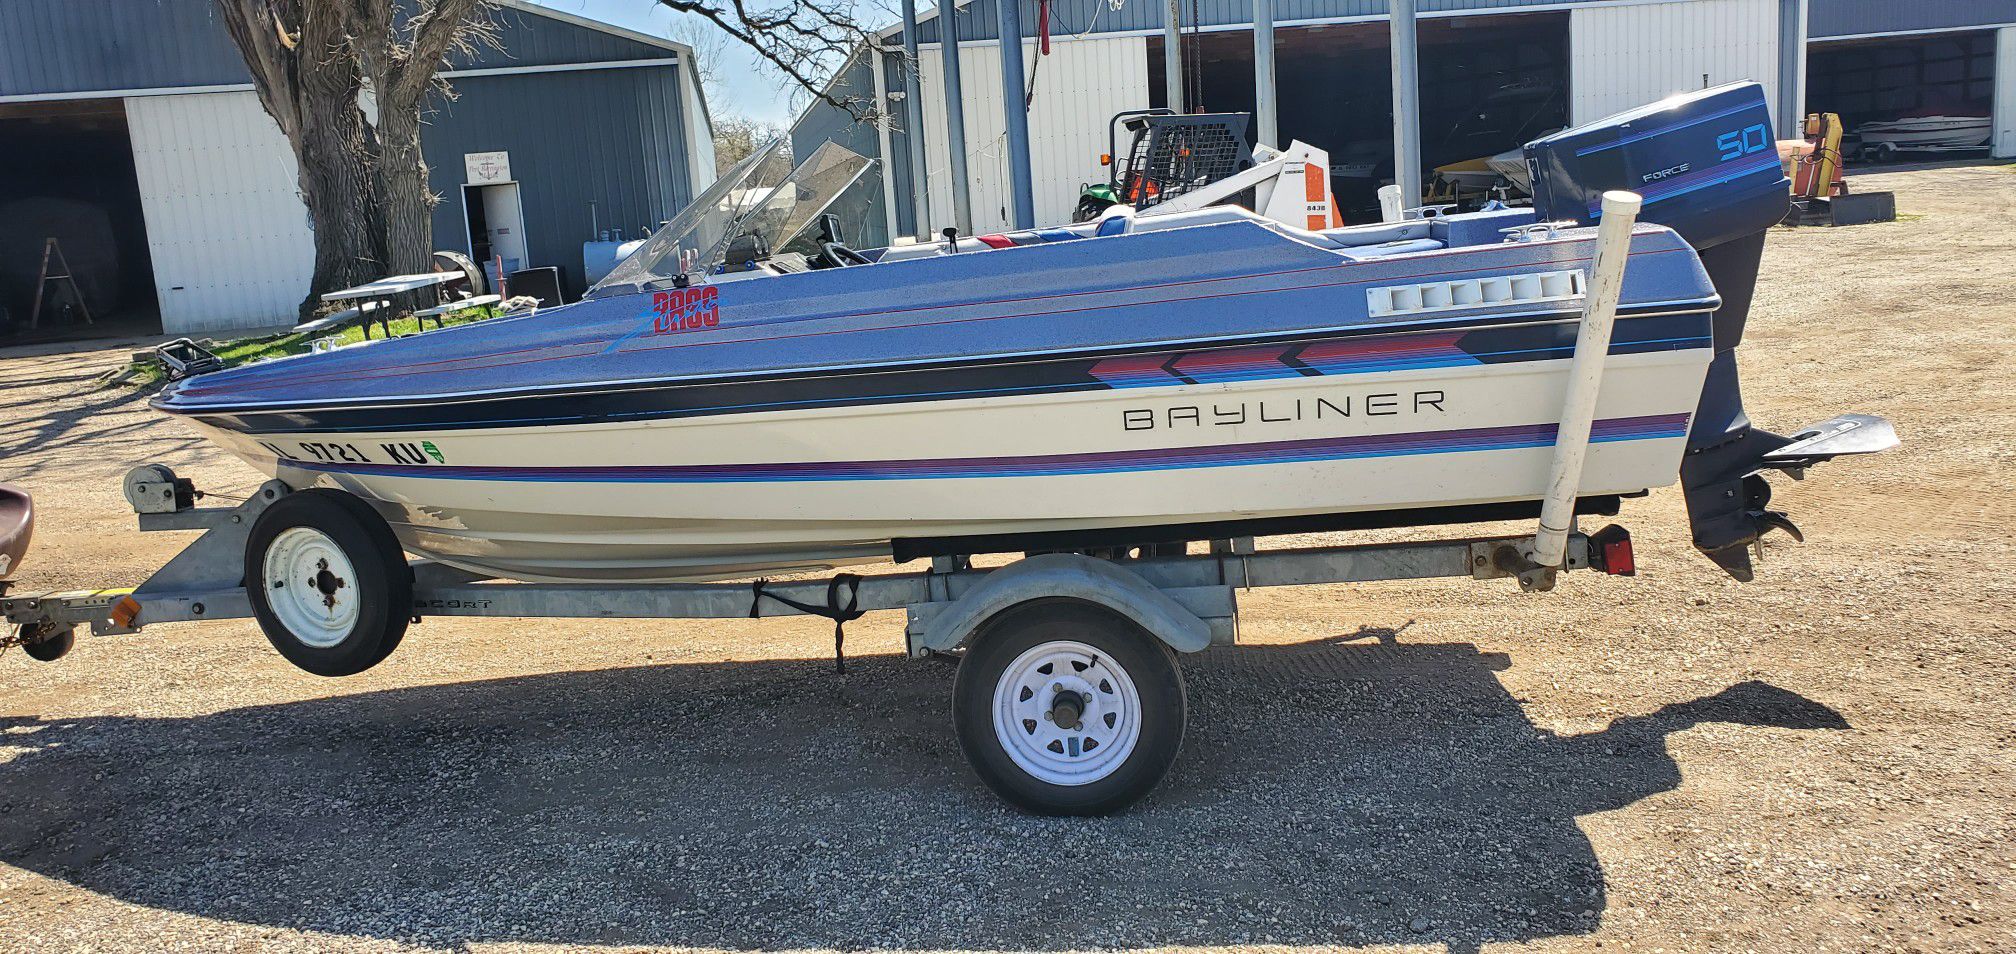 Bayliner Bass Striker 1987. Runs good, no leaks or issues. Boat is serviced for winter storage